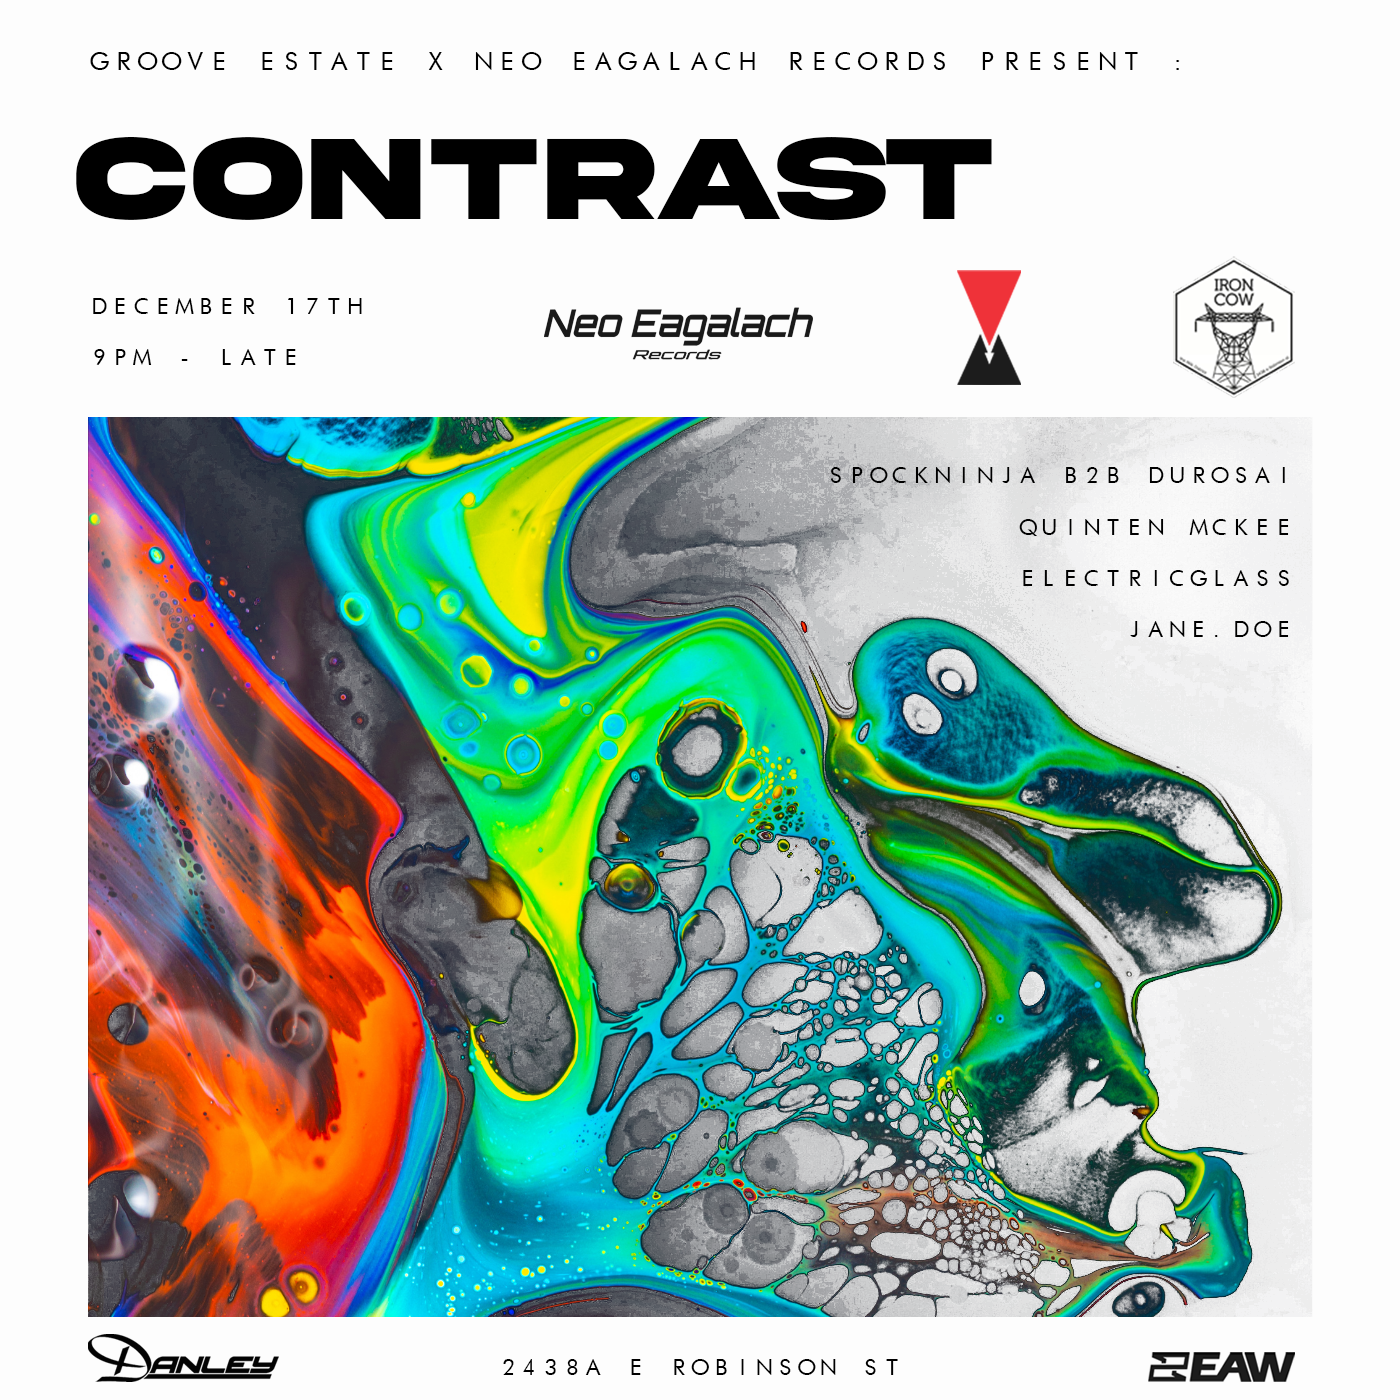 Groove Estate X Neo Eagalach Records present: CONTRAST at Iron Cow